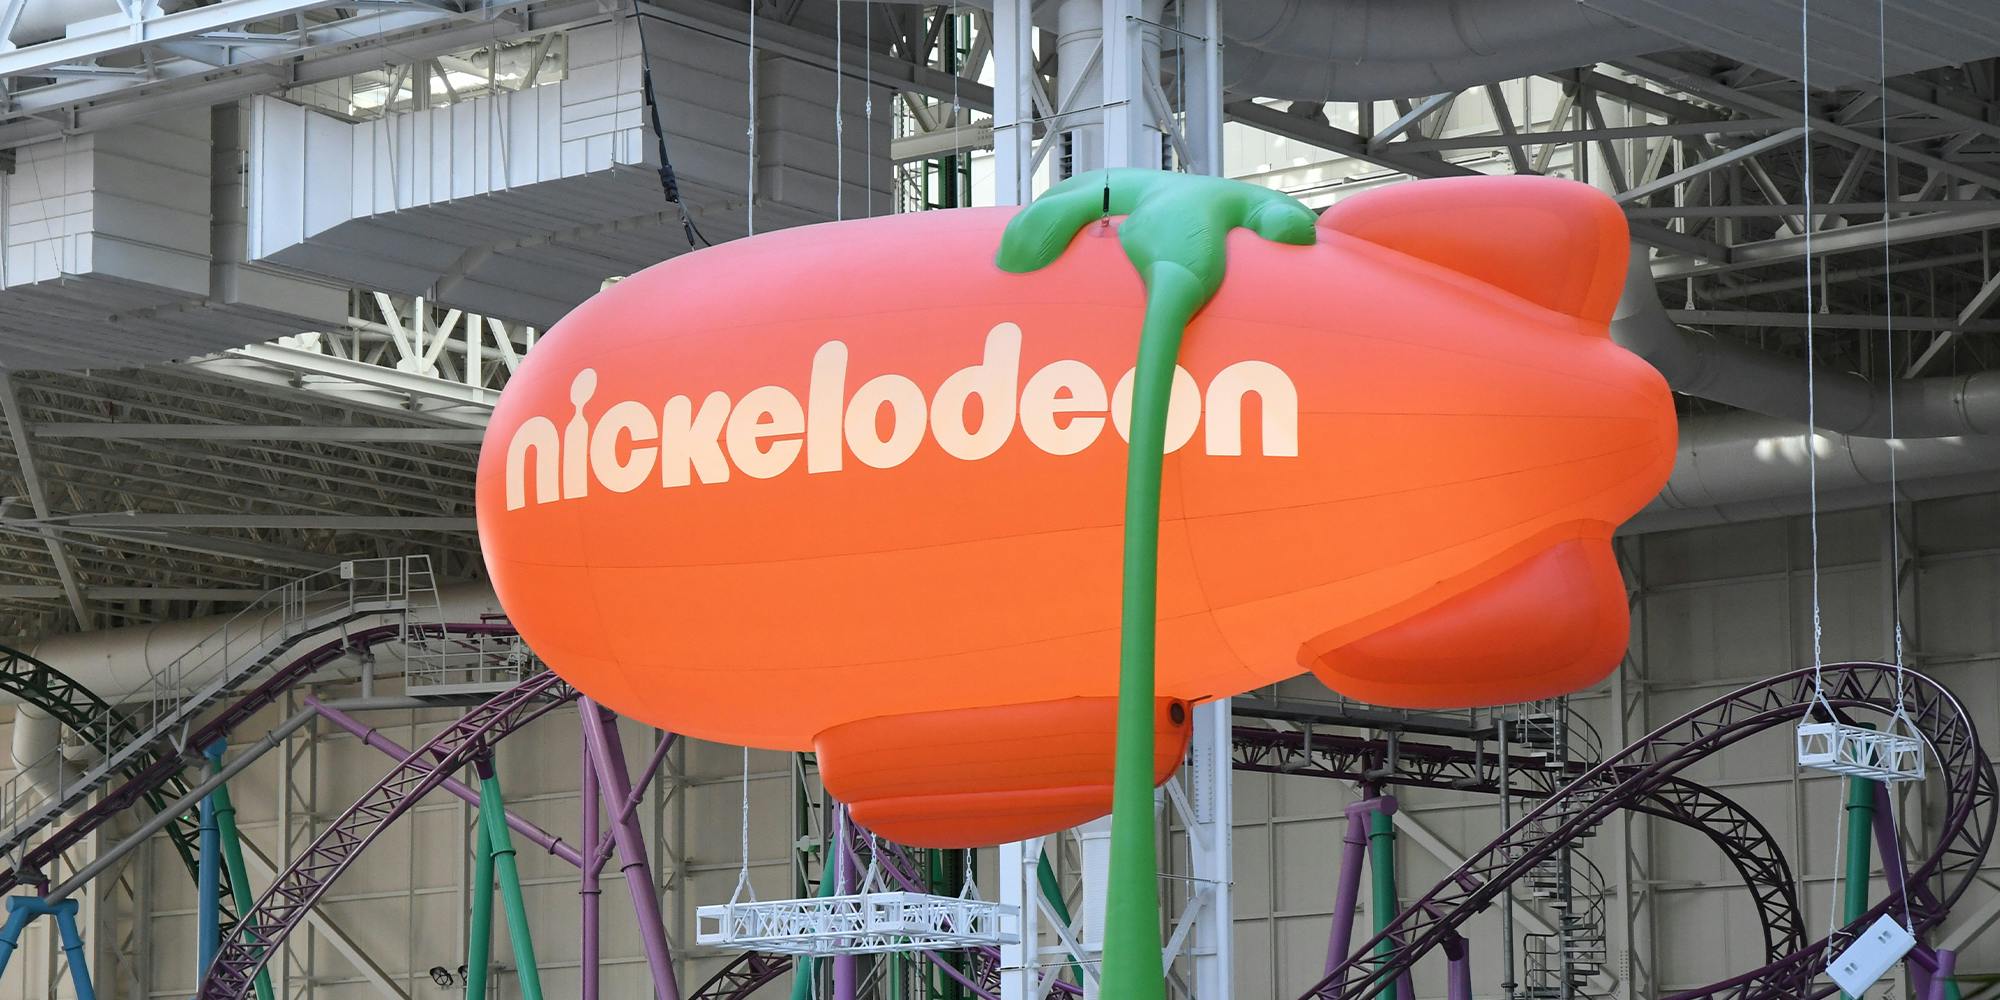 Nickelodeon Says Data Leak is Old Content